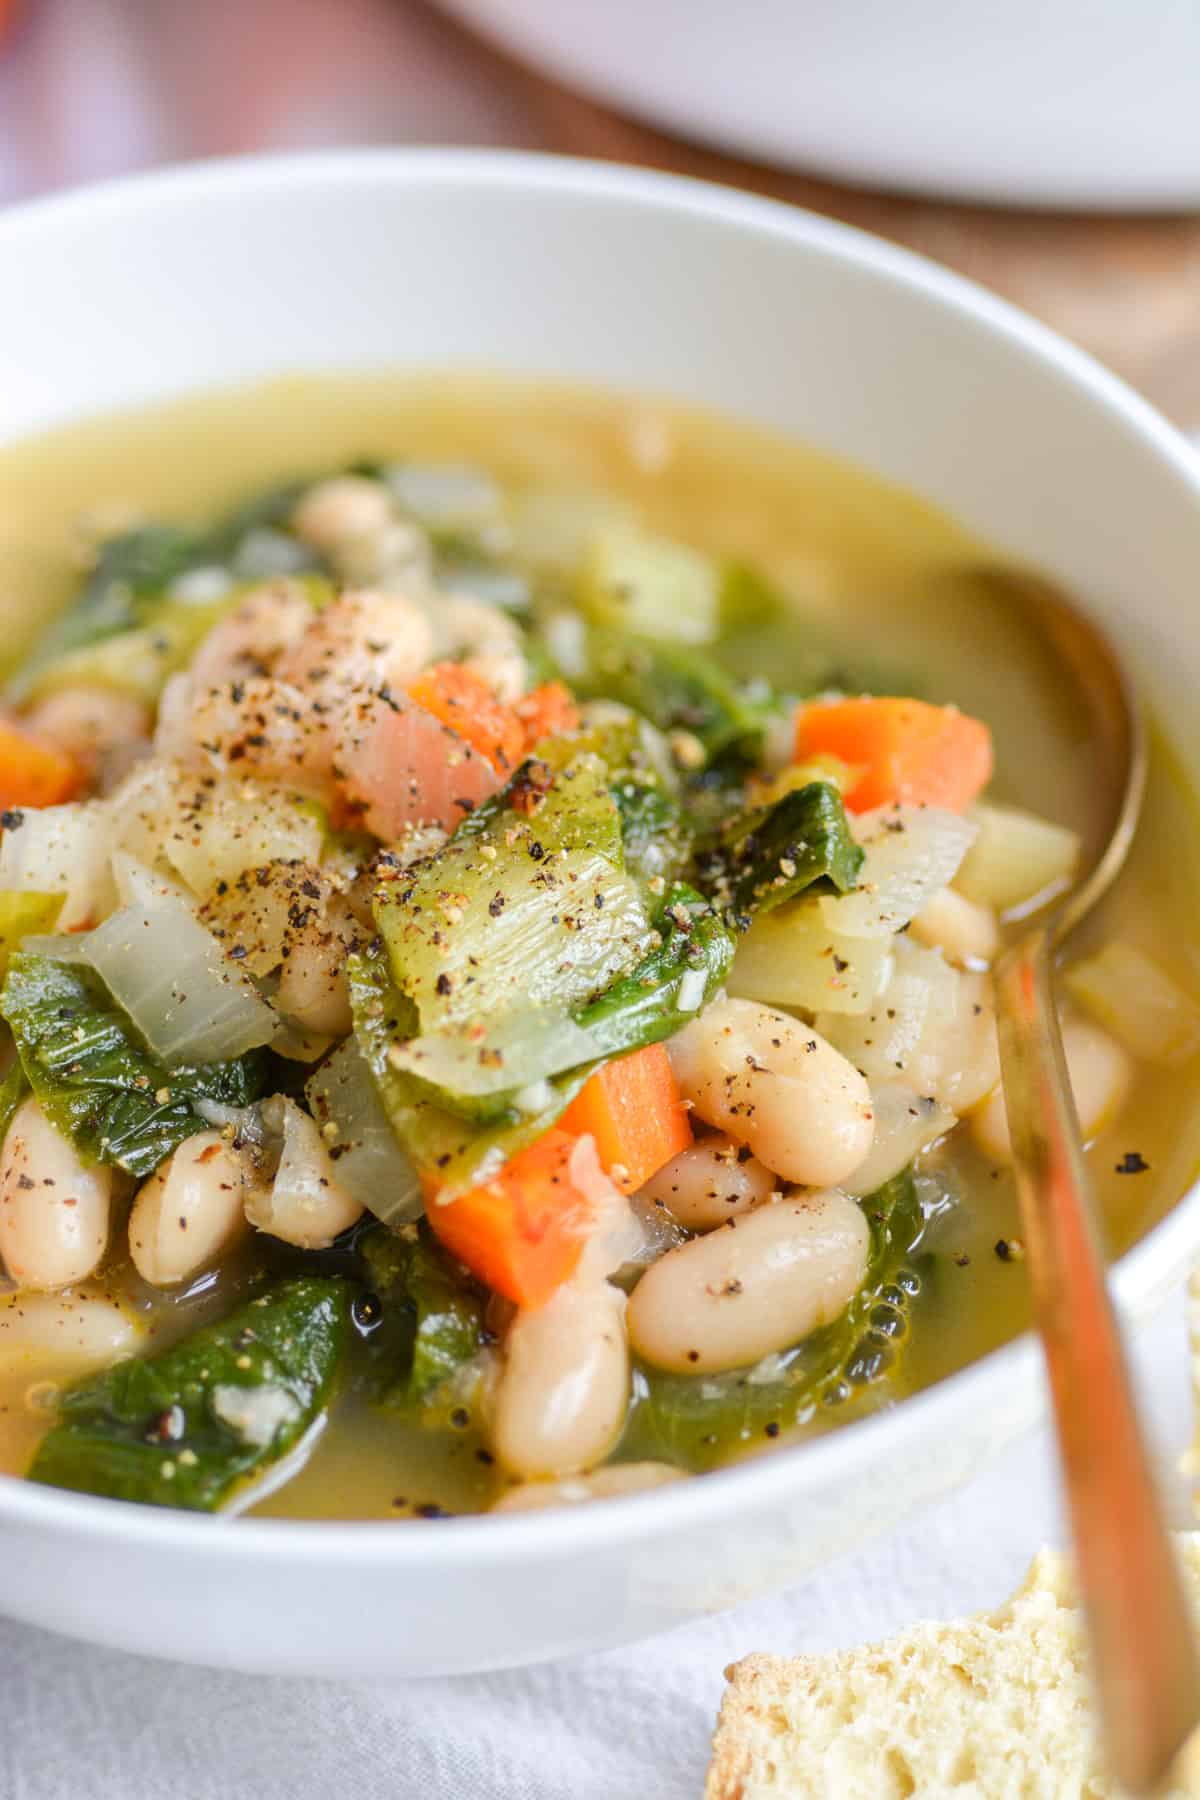 Escarole and cannellini bean soup in a white bowl with a gold spoon.